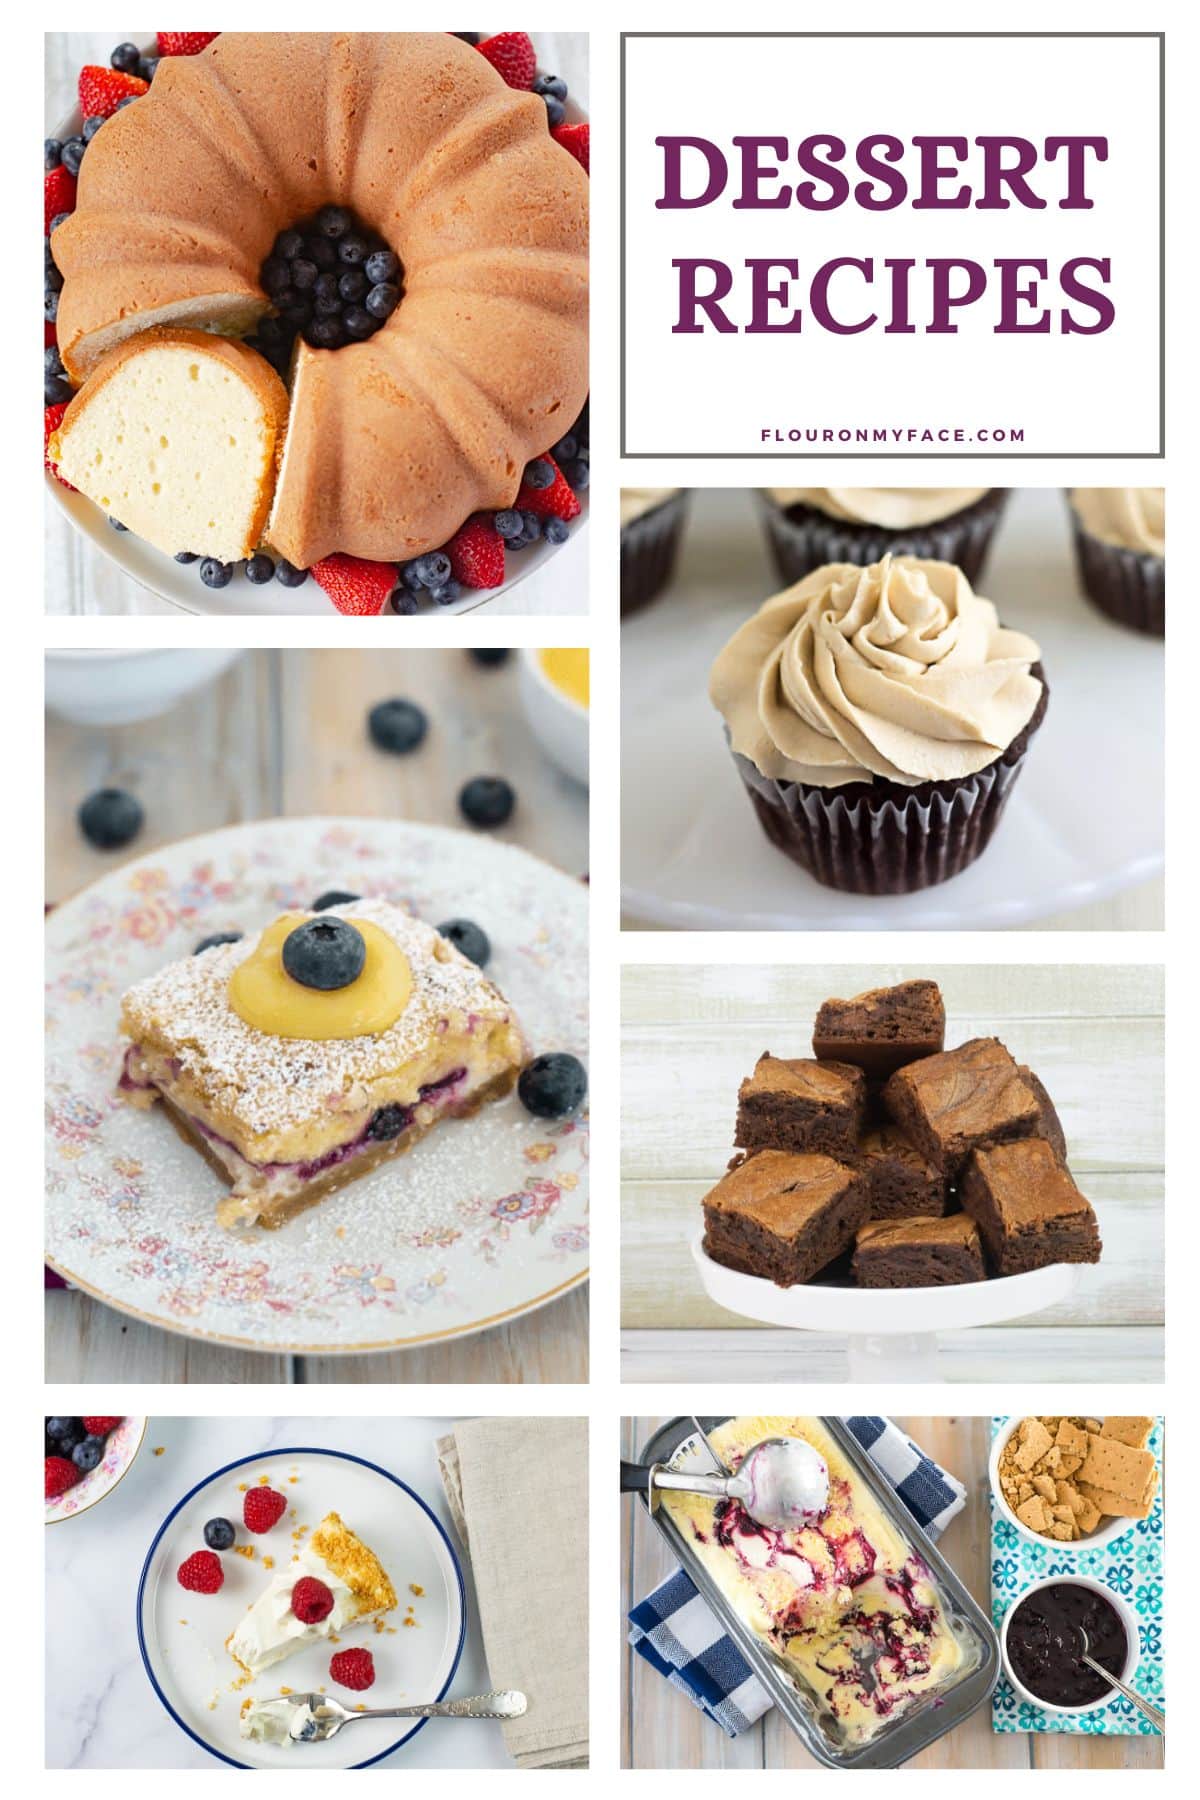 6 image collage with previews of 6 dessert recipes.